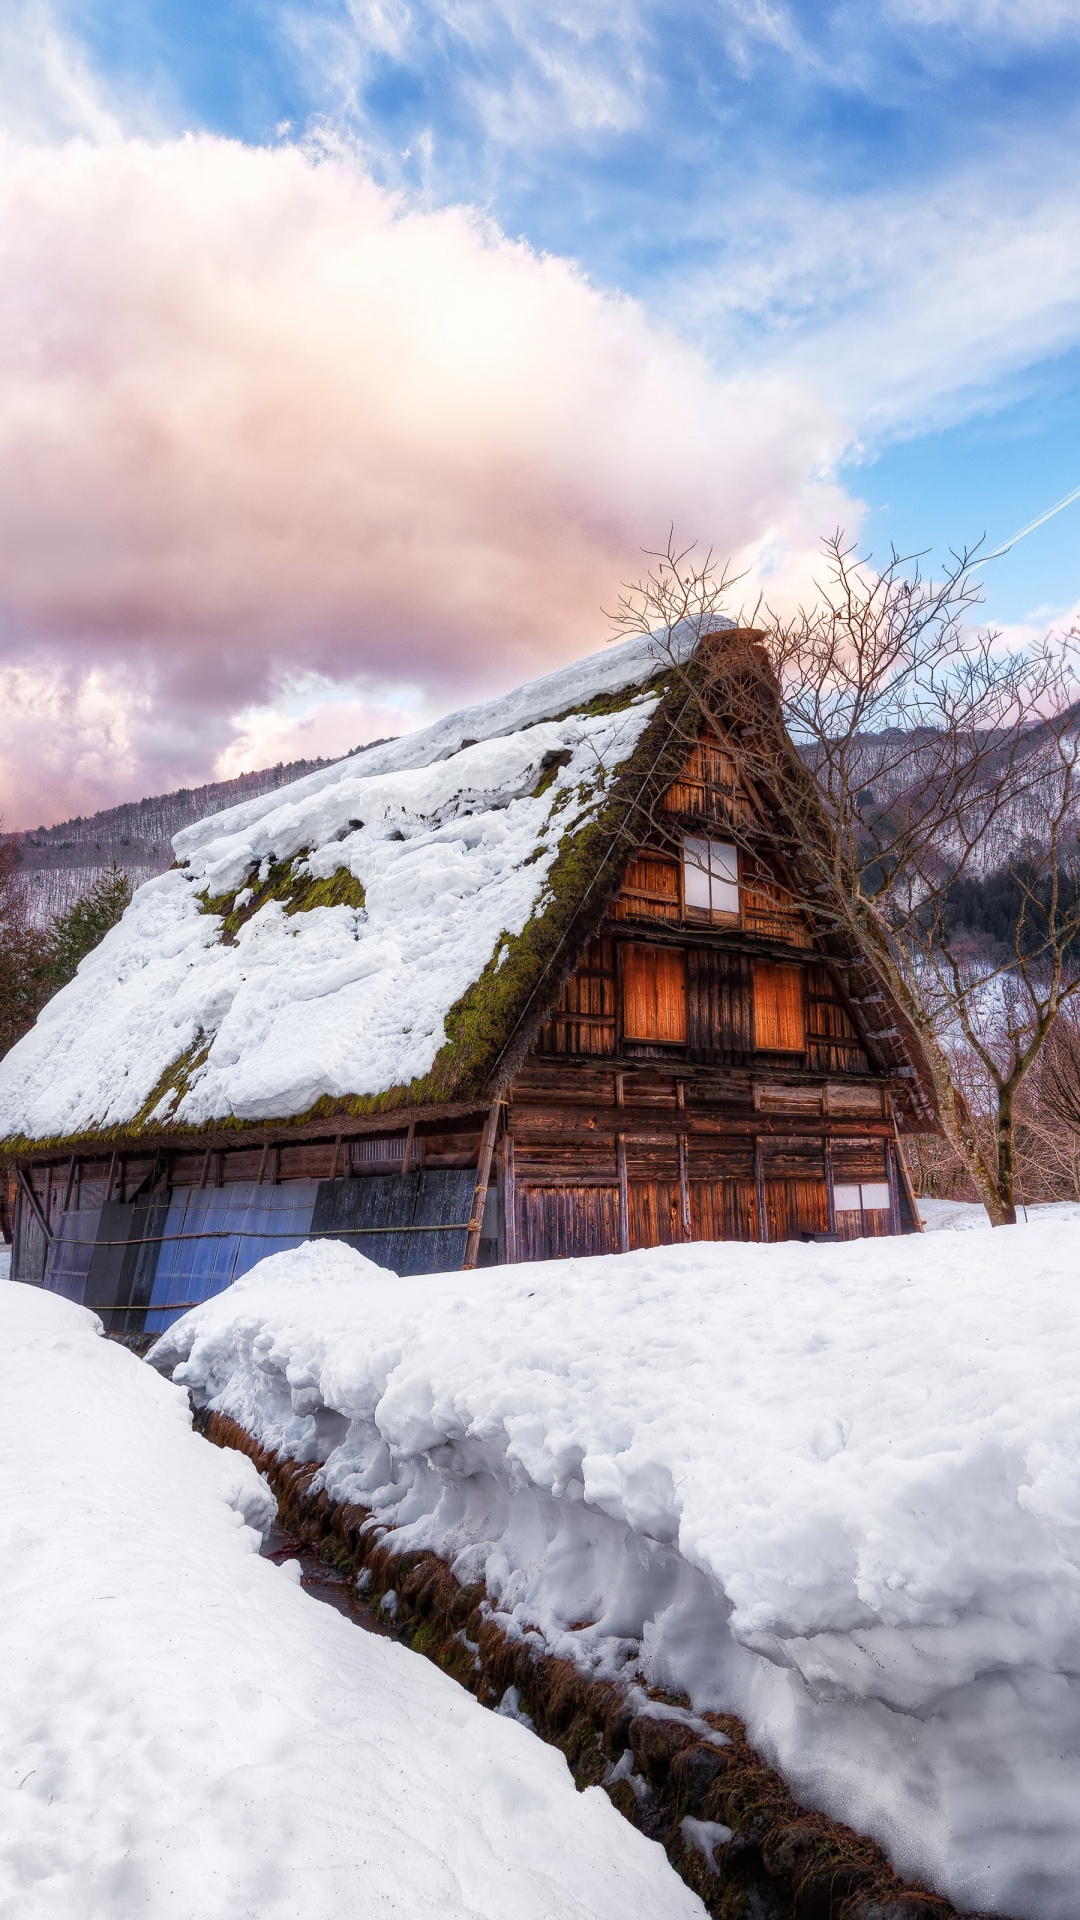 Brown Wooden House on Snow Covered Ground Under White Clouds and Blue Sky During Daytime. Wallpaper in 1080x1920 Resolution